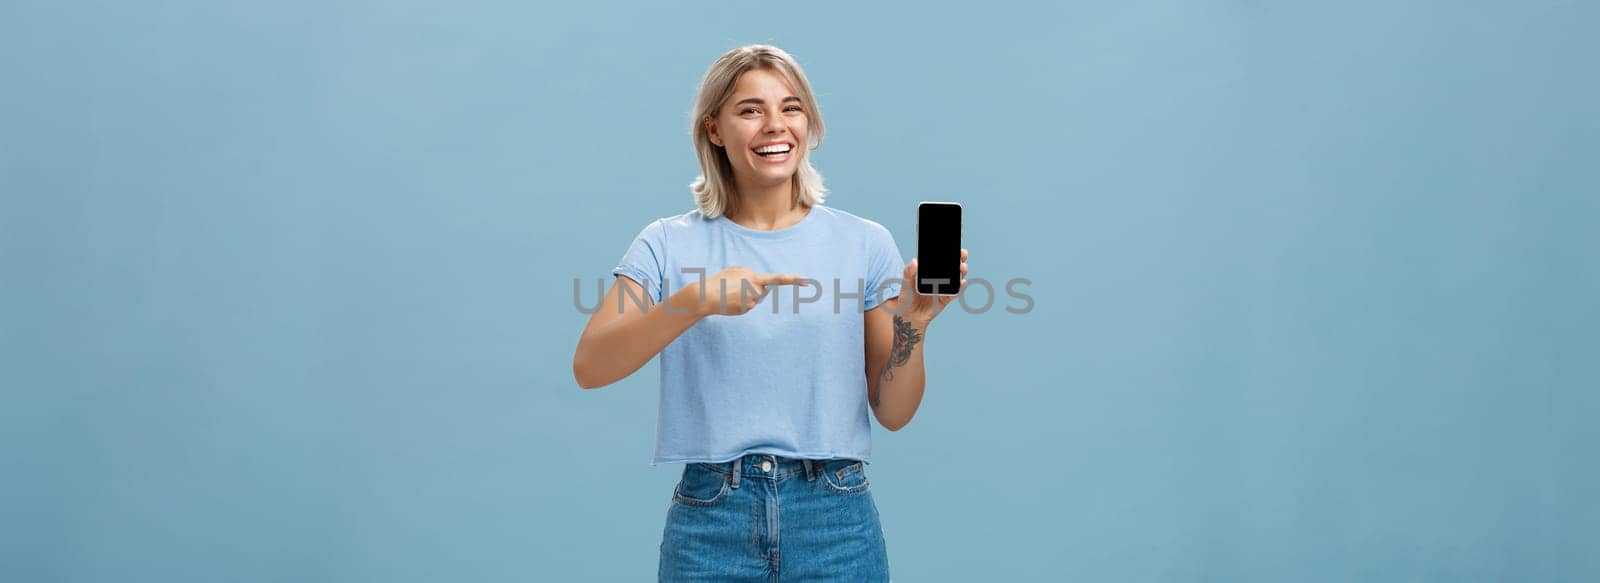 Look at this hilarious photo. Entertained attractive happy woman with fair hair in casual t-shirt and denim shorts showing smartphone at camera pointing at device screen smiling broadly over blue wall.